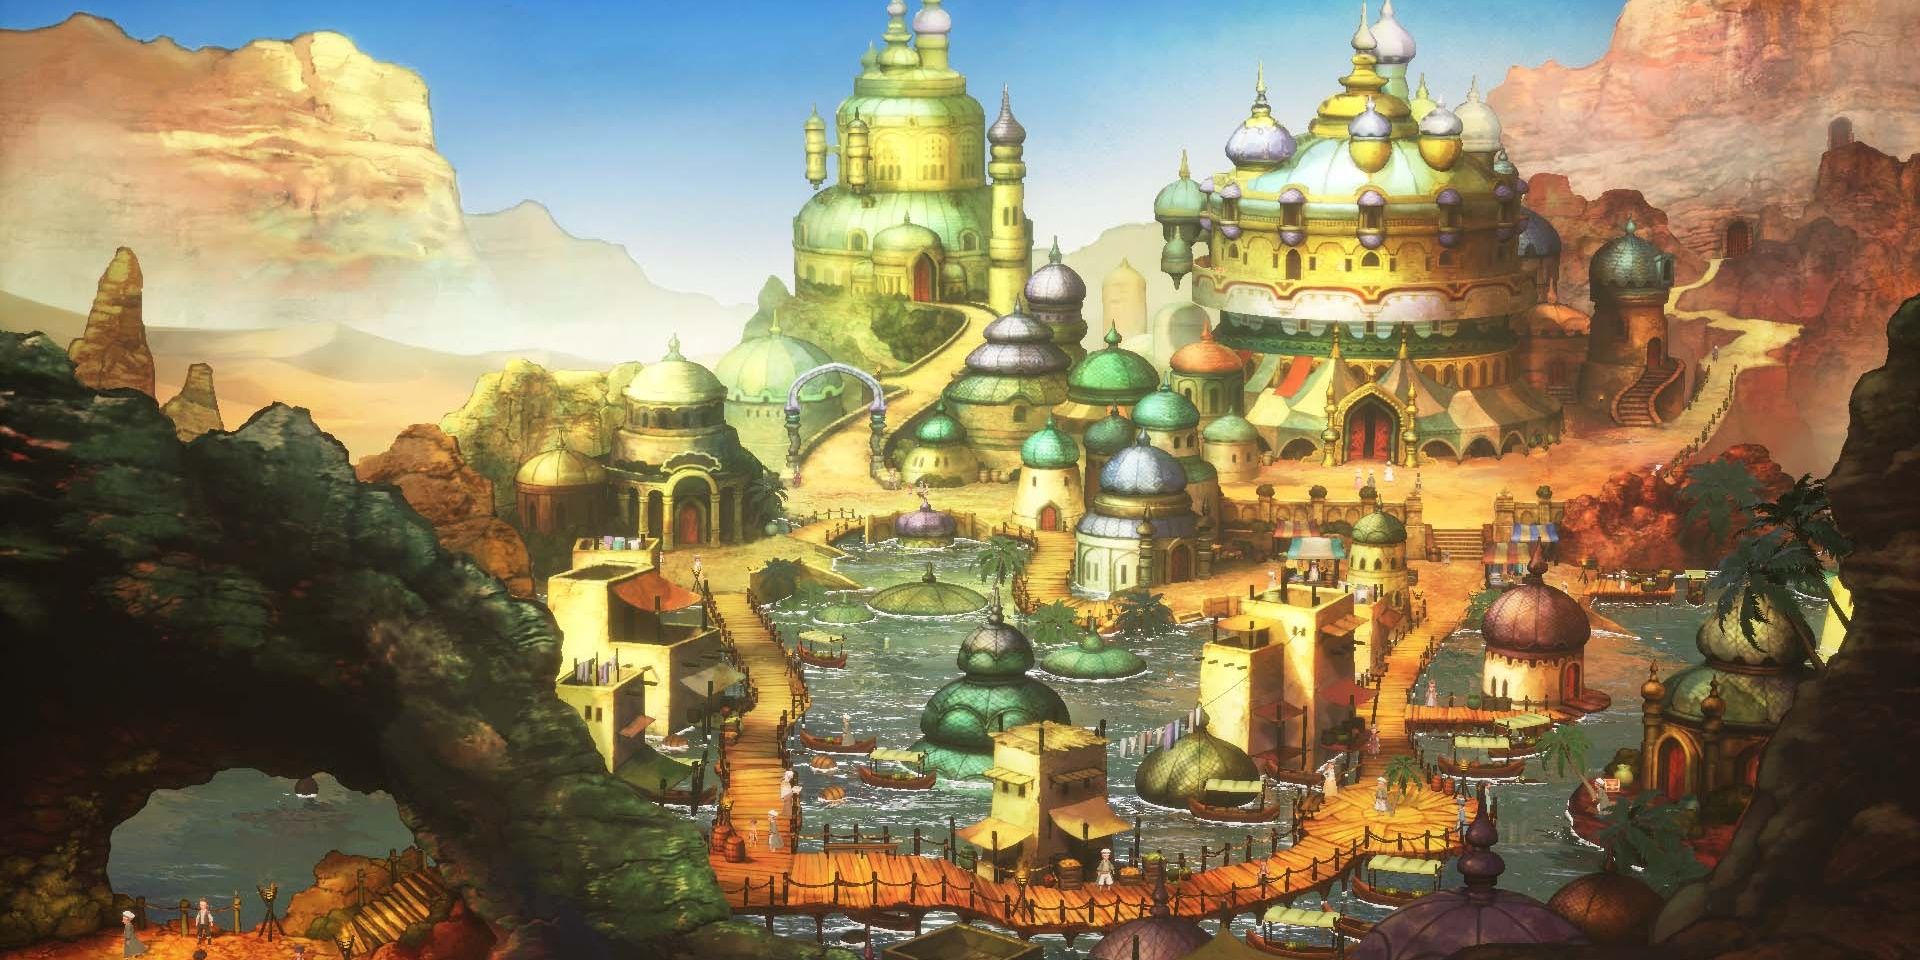 Backdrop of a town from Bravely Default 2